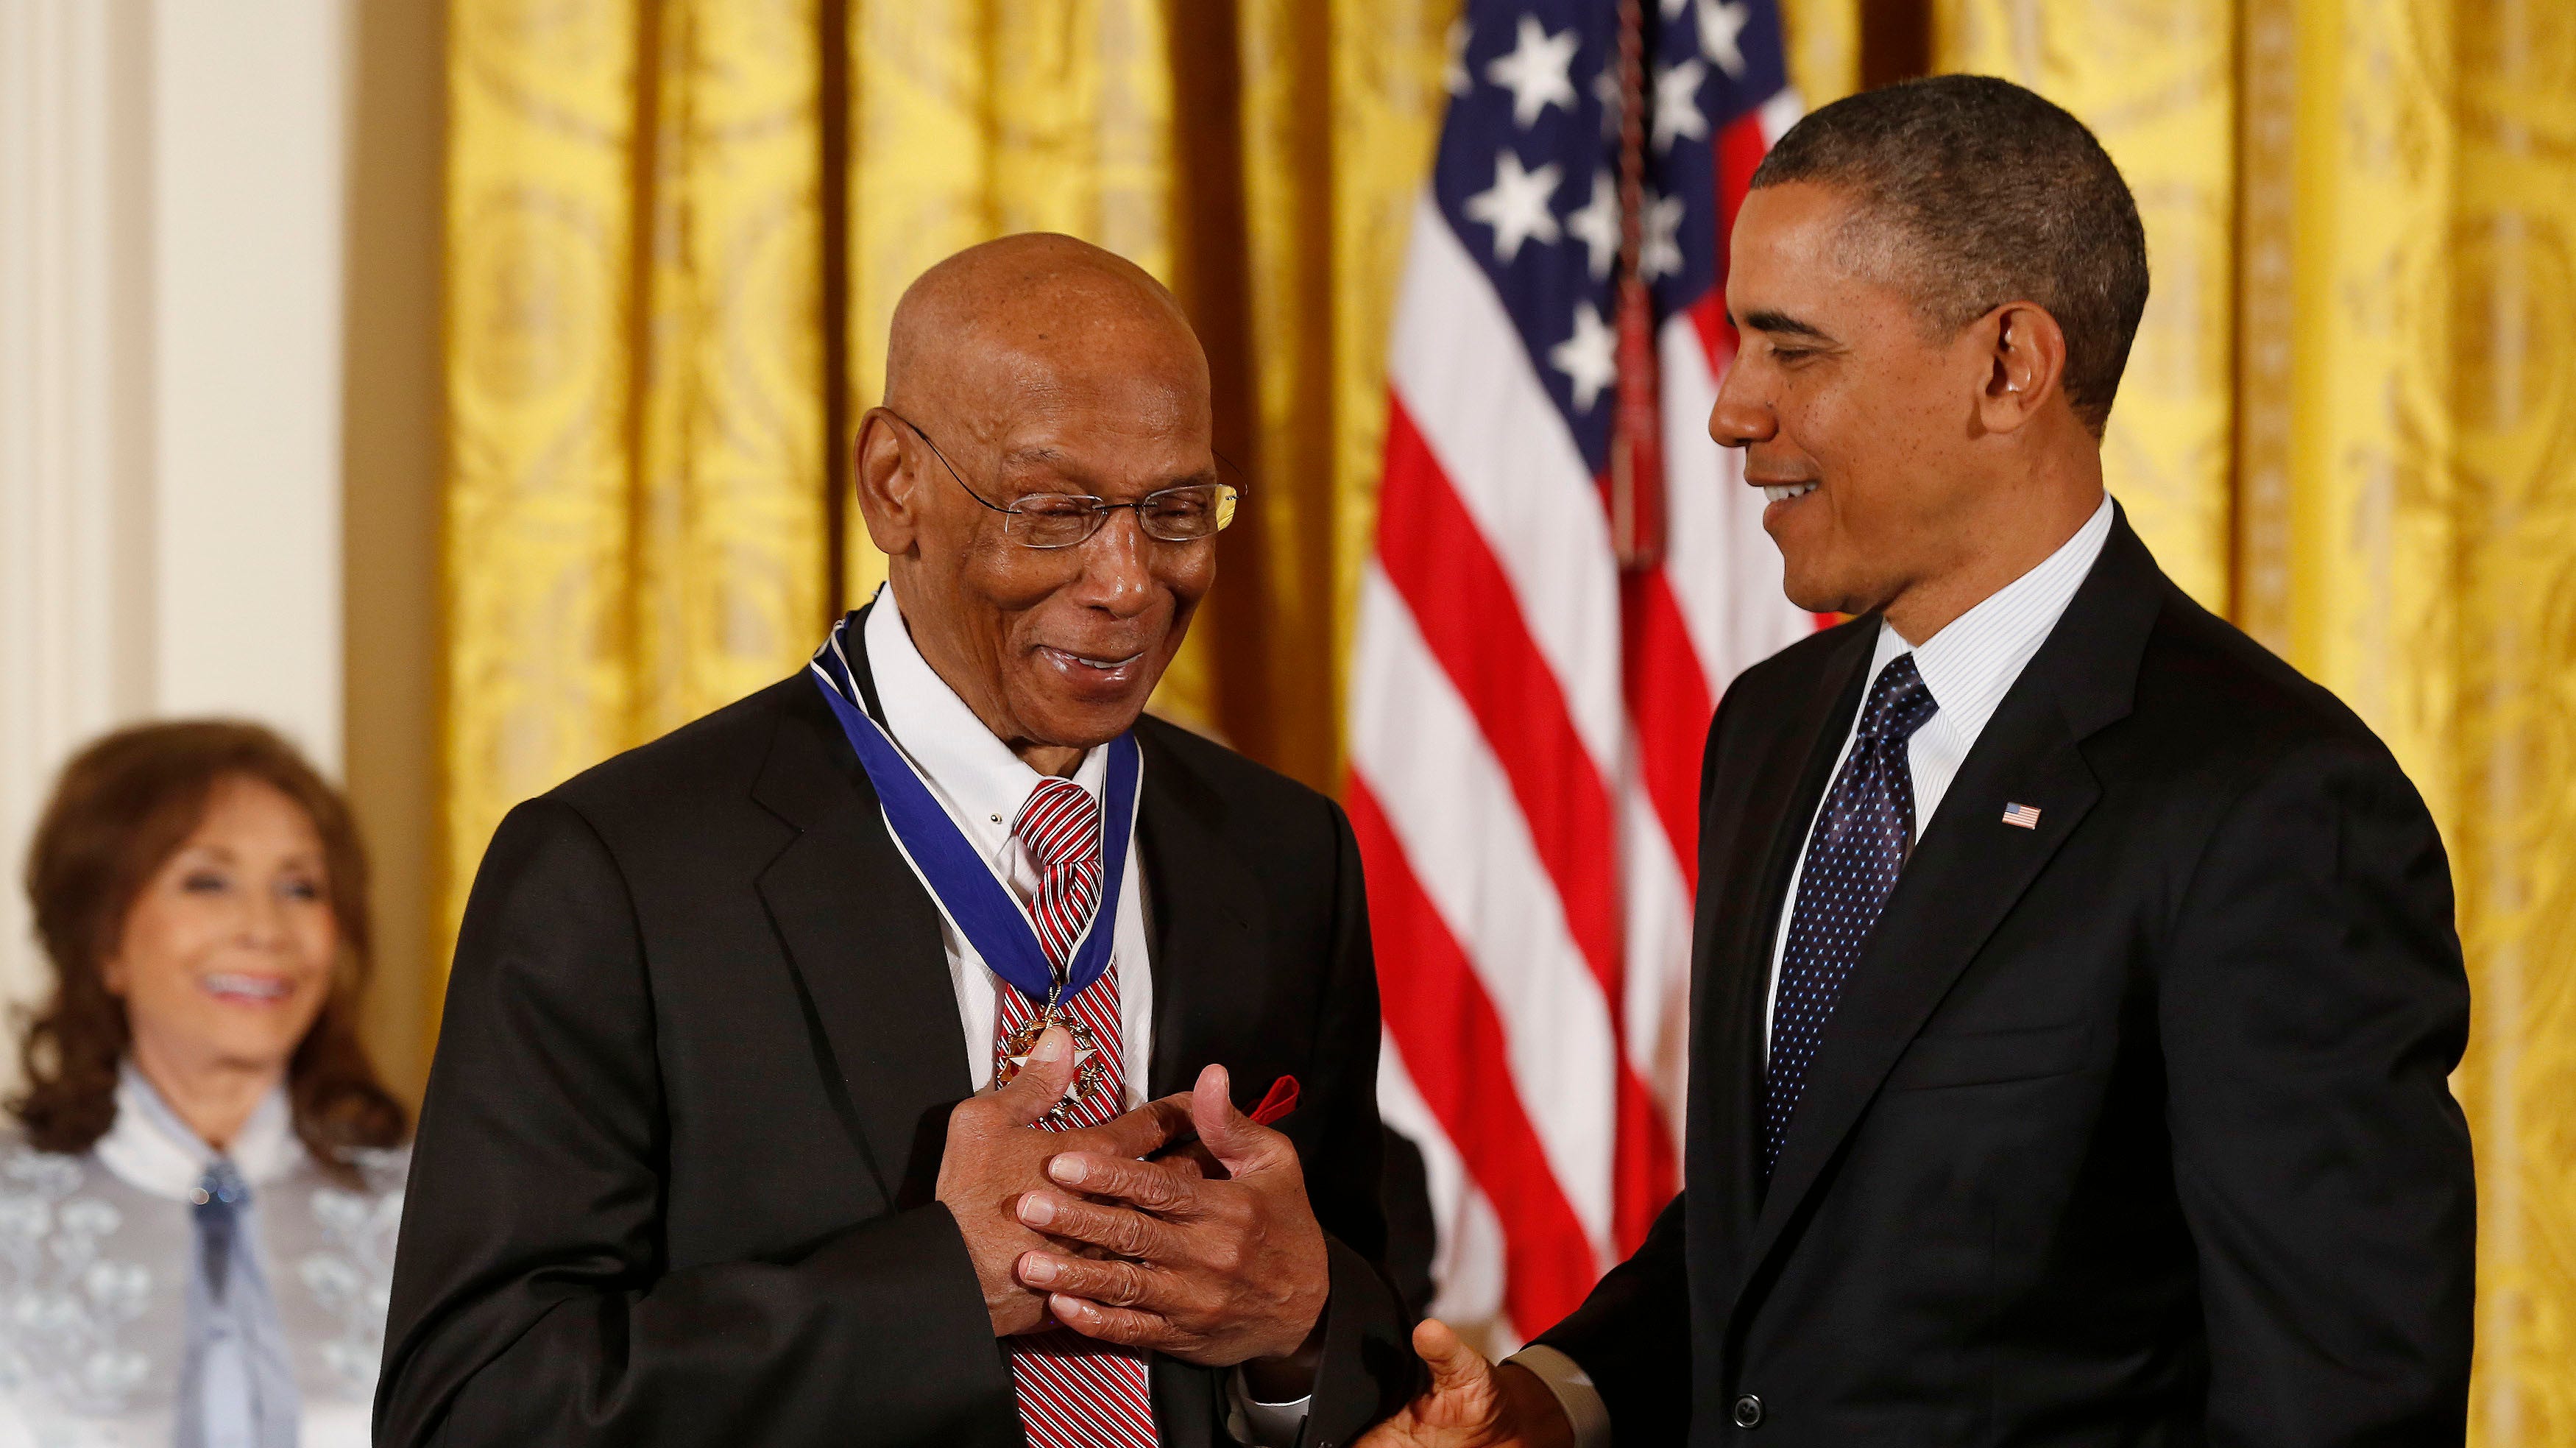 Chicago Cubs legend Ernie Banks has died at 83